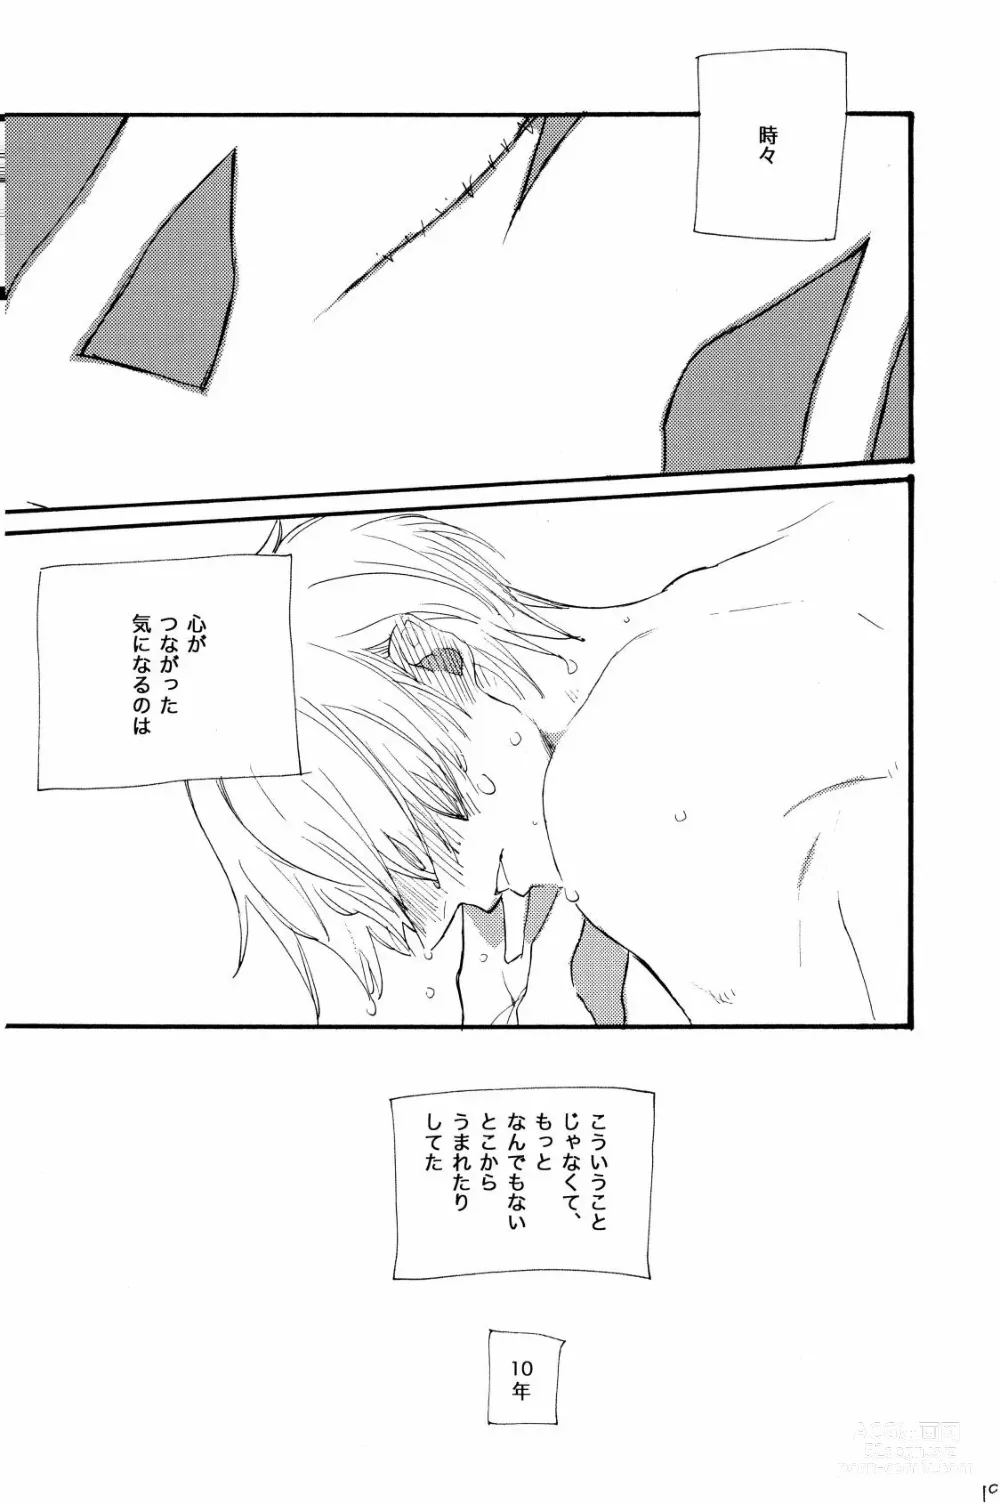 Page 18 of doujinshi 315569261second